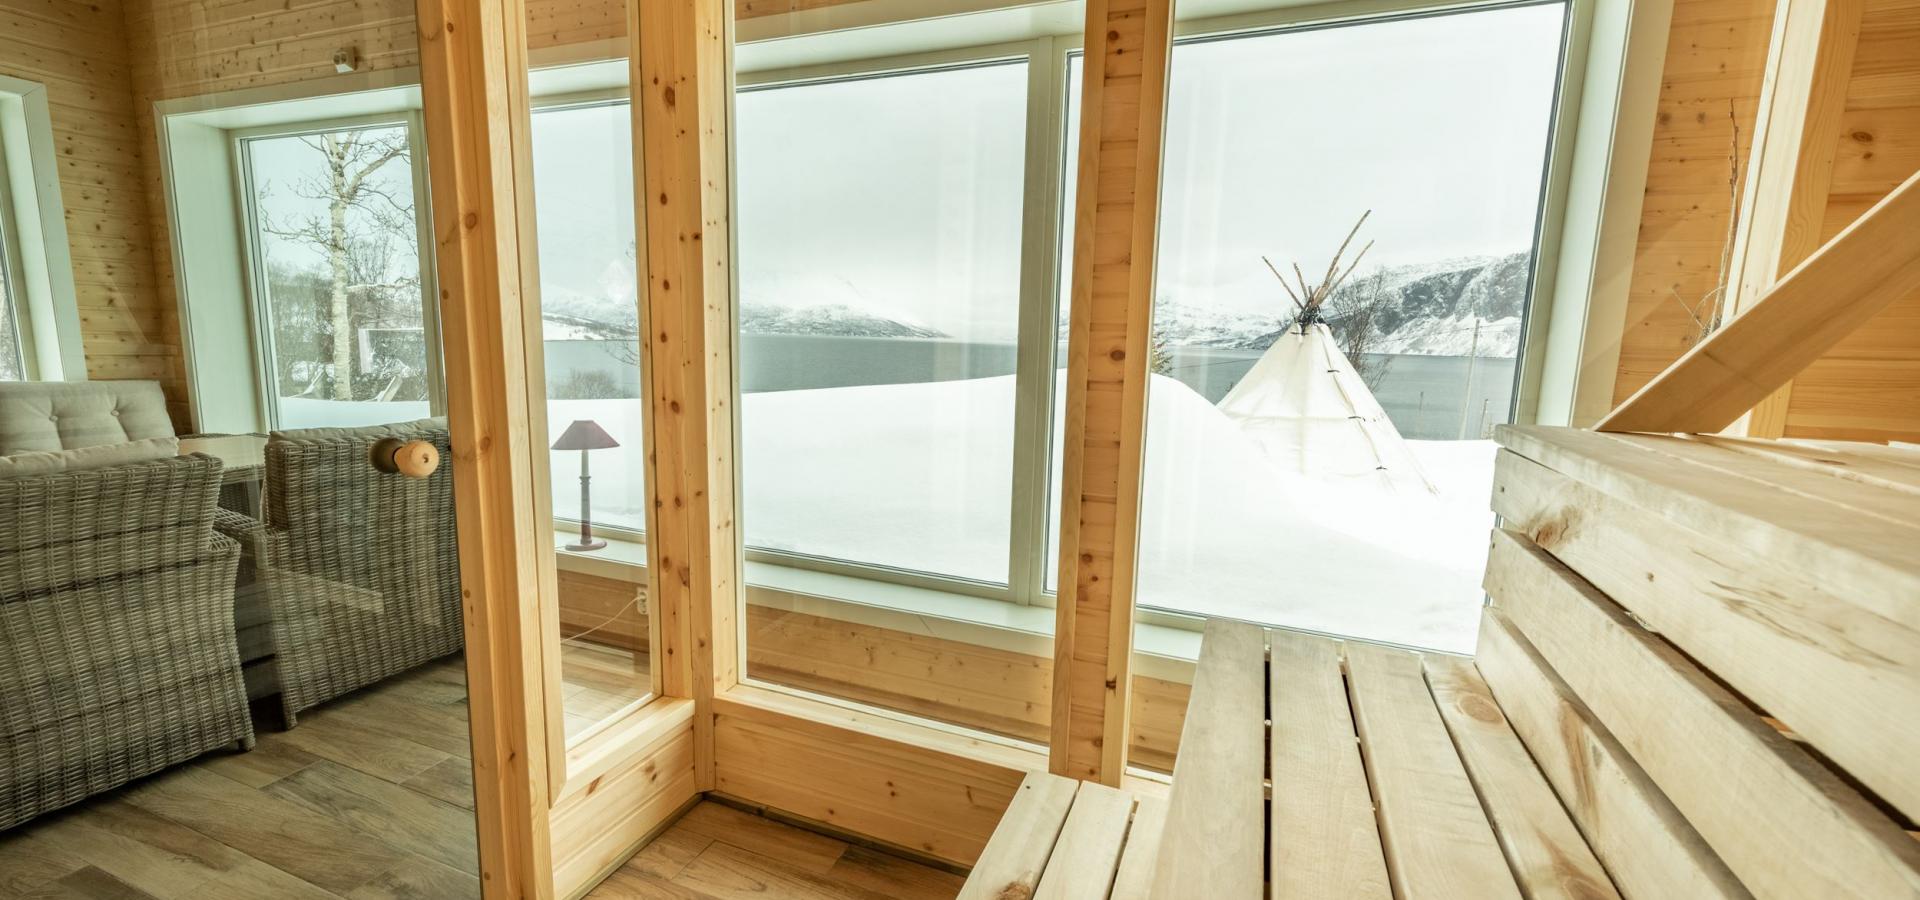 The sauna with a view.